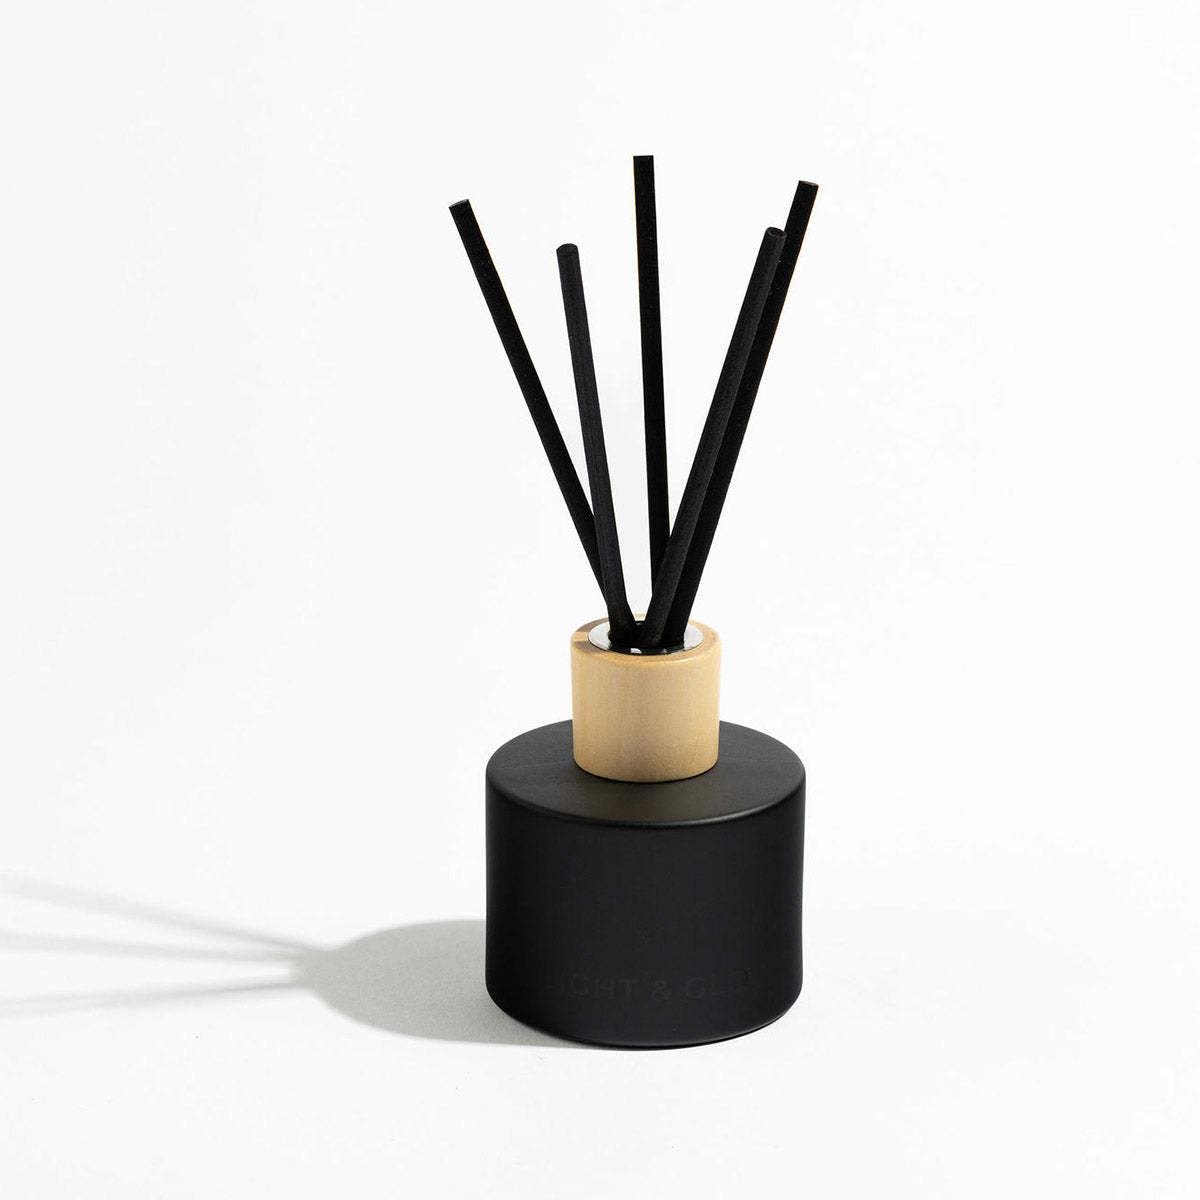 Coconut &amp; Lime - Monochrome Scent Diffuser | Luxury Candles &amp; Home Fragrances by Light + Glo